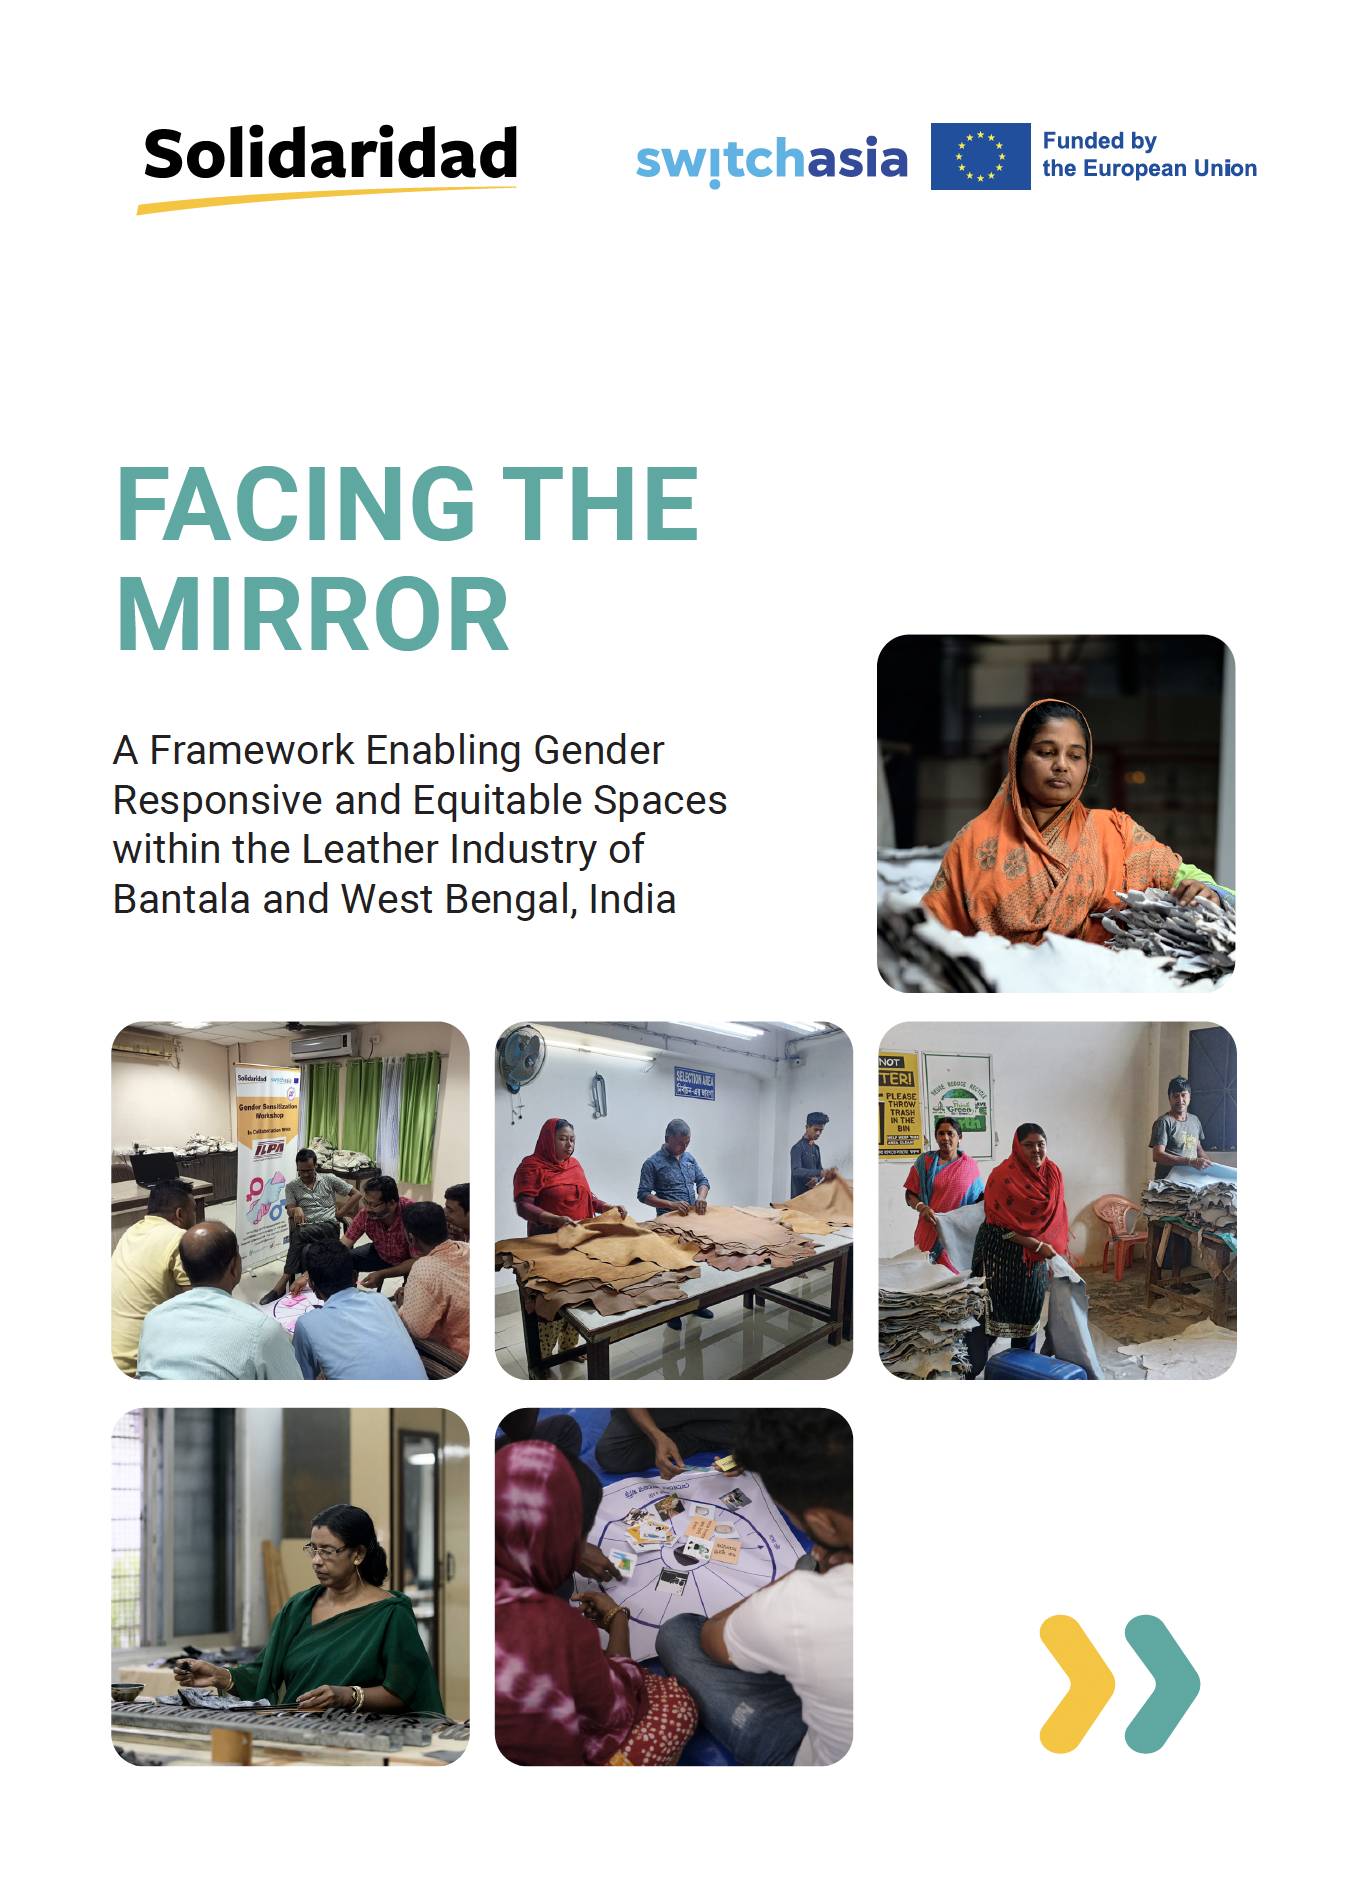 Facing the Mirror: A Framework Enabling Gender Responsive and Equitable Spaces within the Leather Industry of Bantala and West Bengal, India